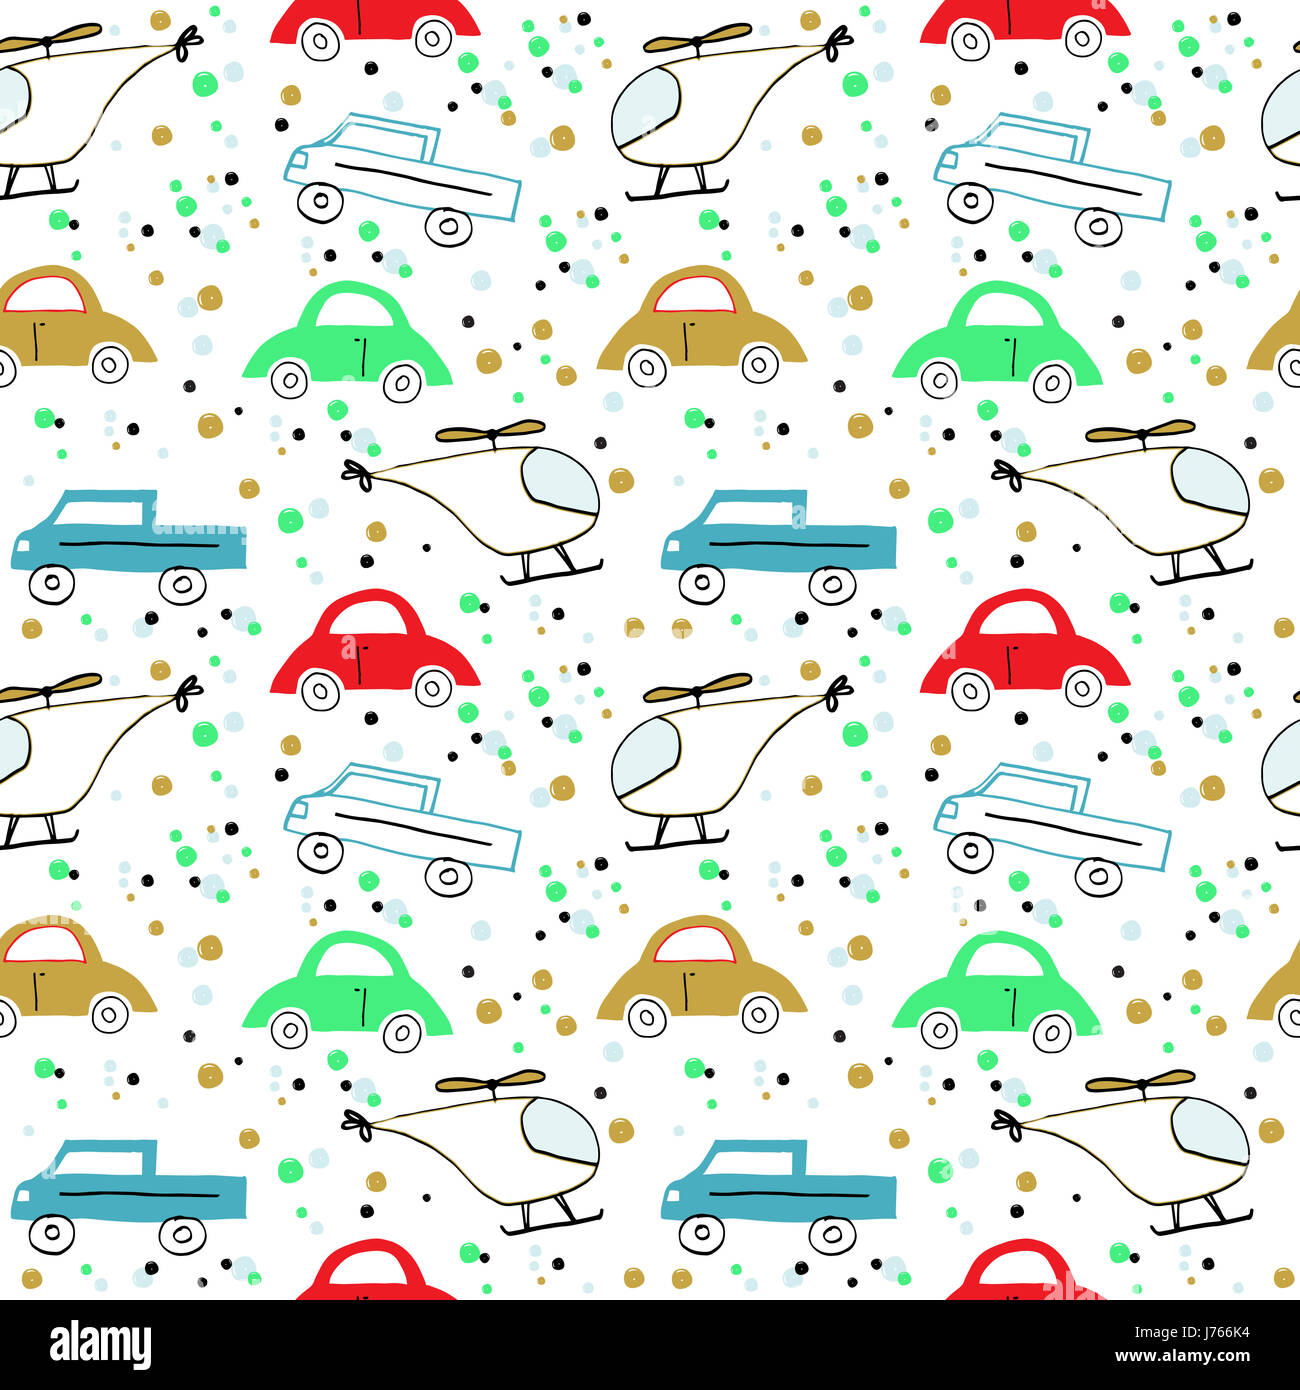 Seamless pattern with colorful cars and helicopters Stock Photo